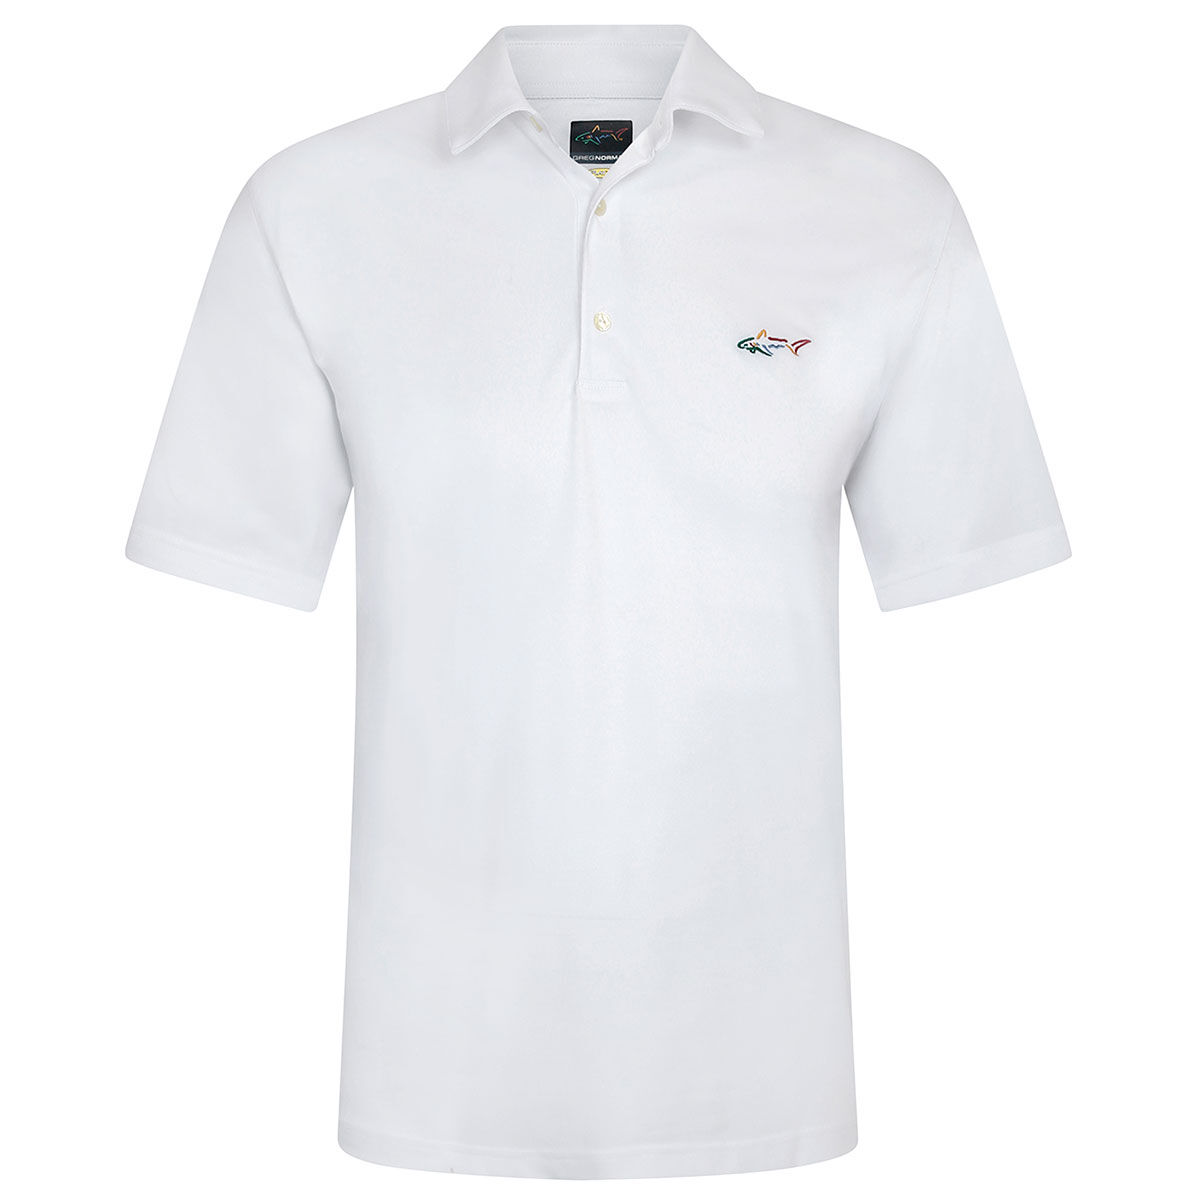 Greg Norman White Embroidered Shark Logo Golf Polo Shirt, Mens | American Golf, Size: Large